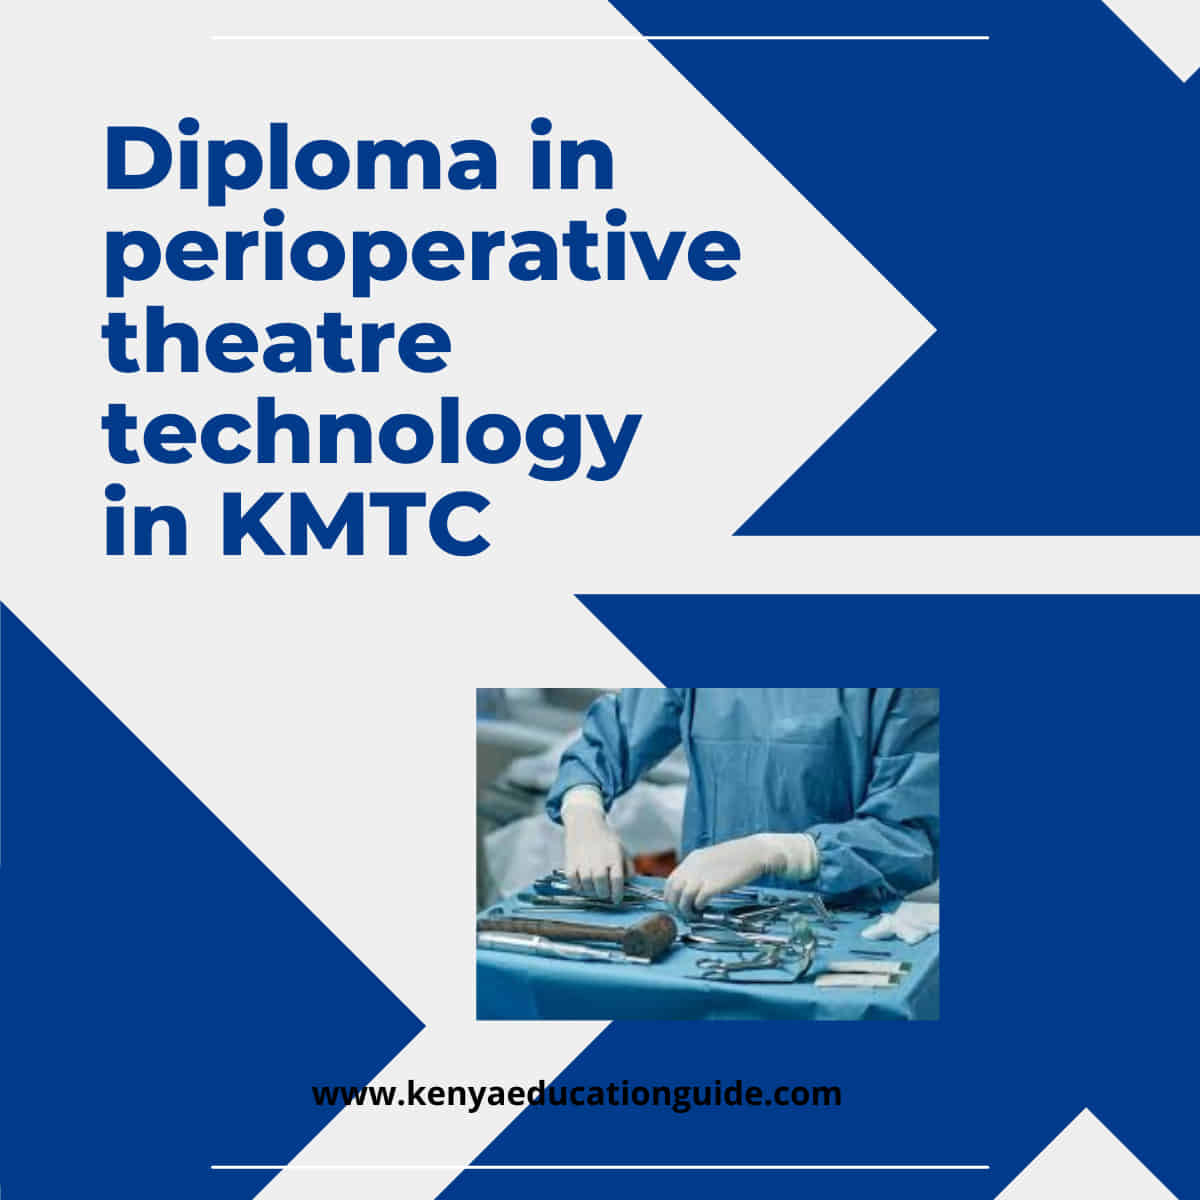 Diploma in perioperative theatre technology in KMTC [all you need to know]